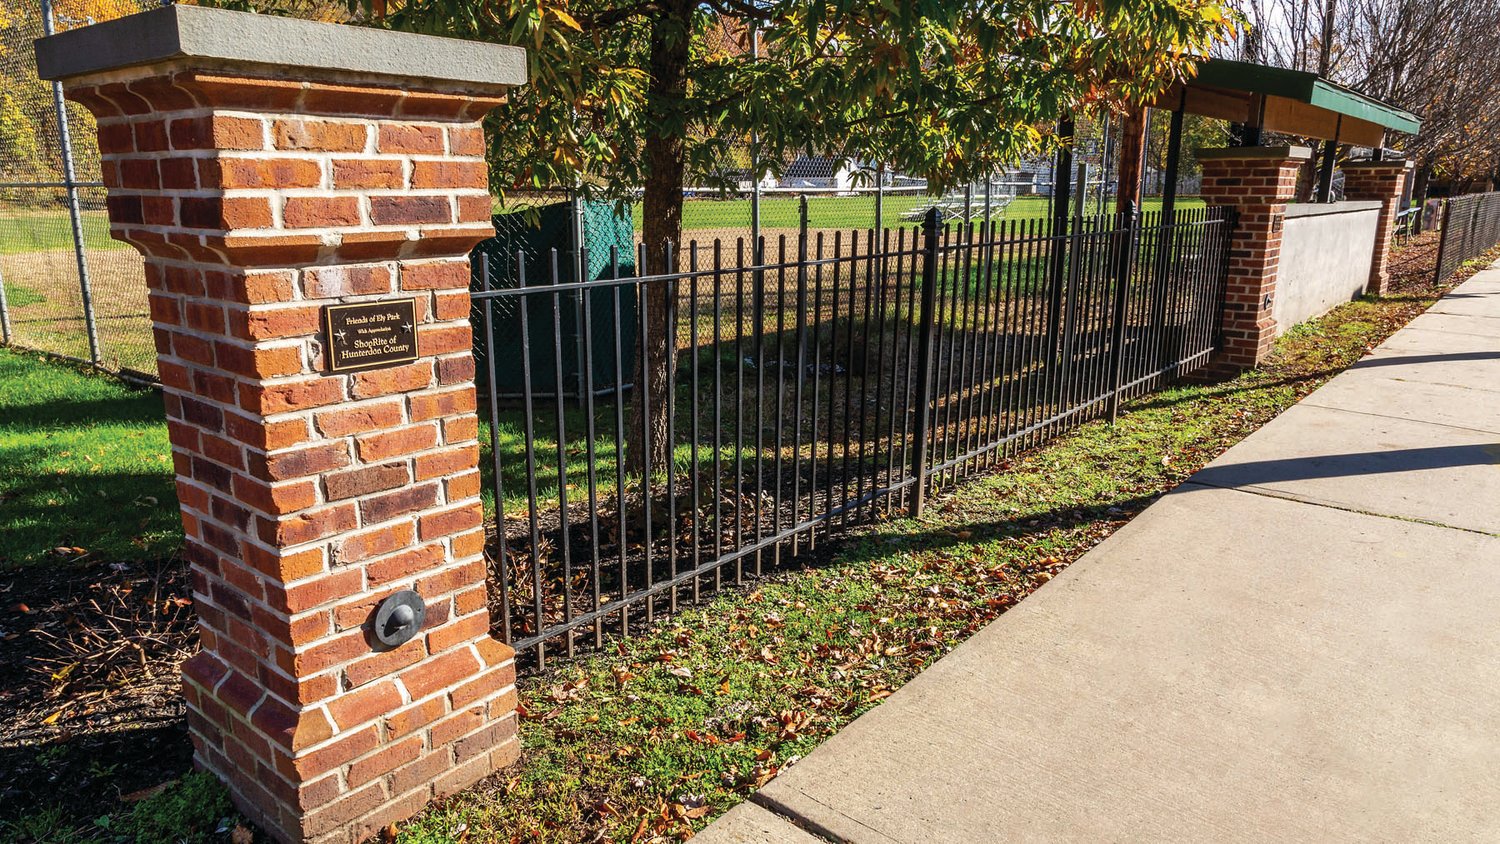 Completion of the brick and wrought iron fence will occur in the spring.